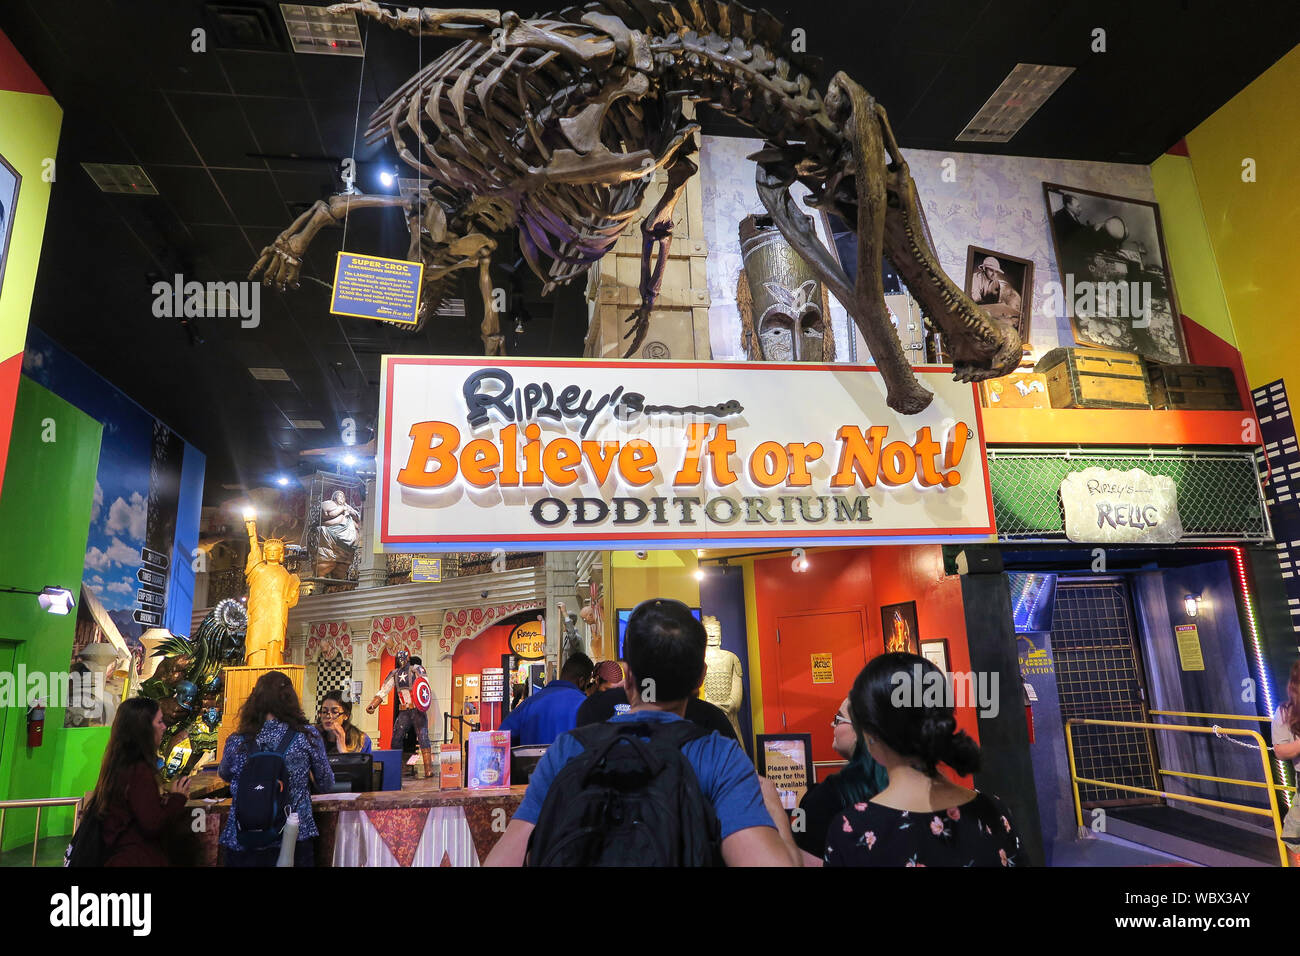 Ripley's croyez le ou non ! Hall, West 42nd Street, NEW YORK CITY Banque D'Images